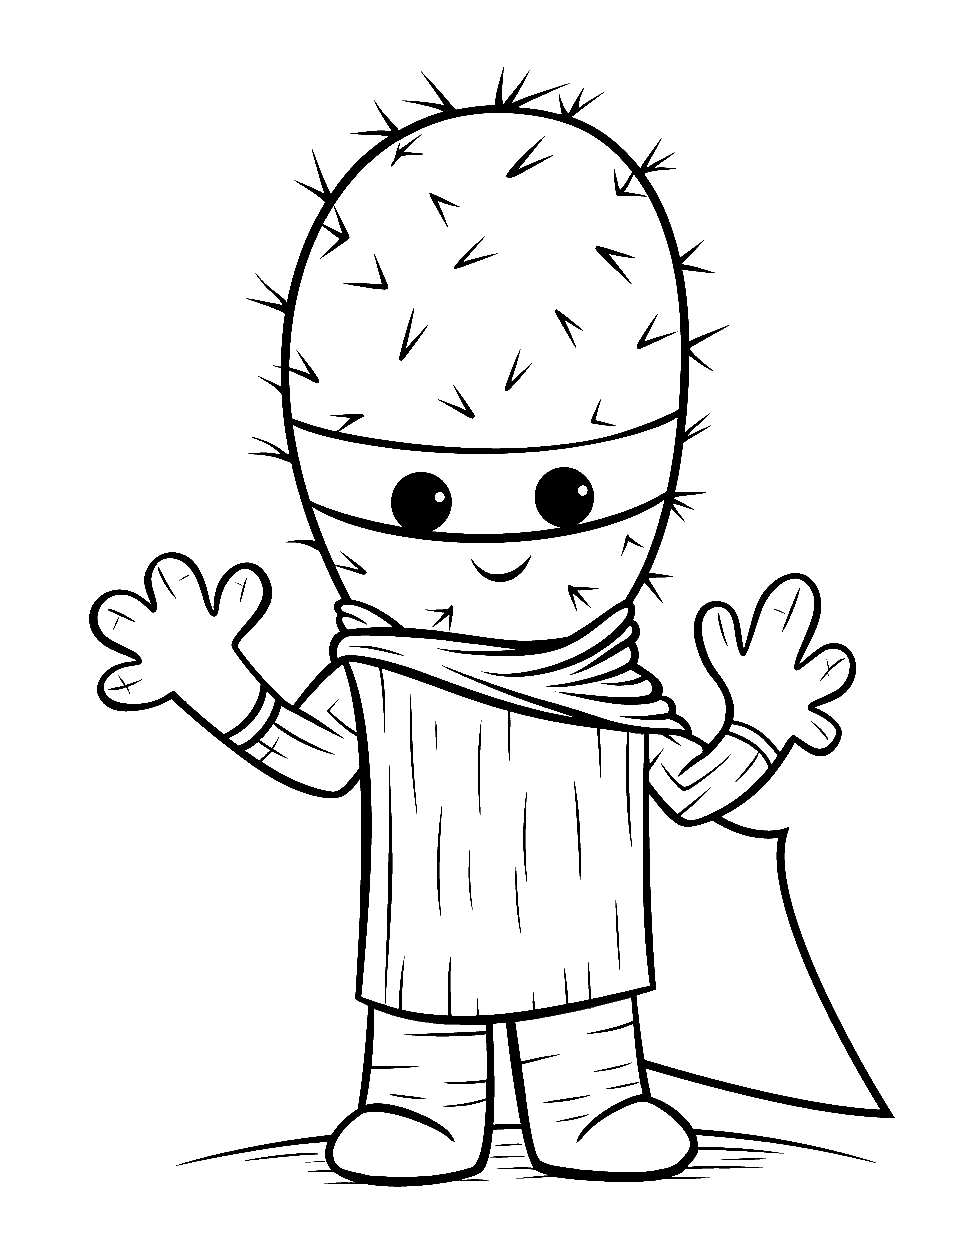 Cactus as a Superhero Coloring Page - A cactus dressed as a superhero, complete with a cape and mask.